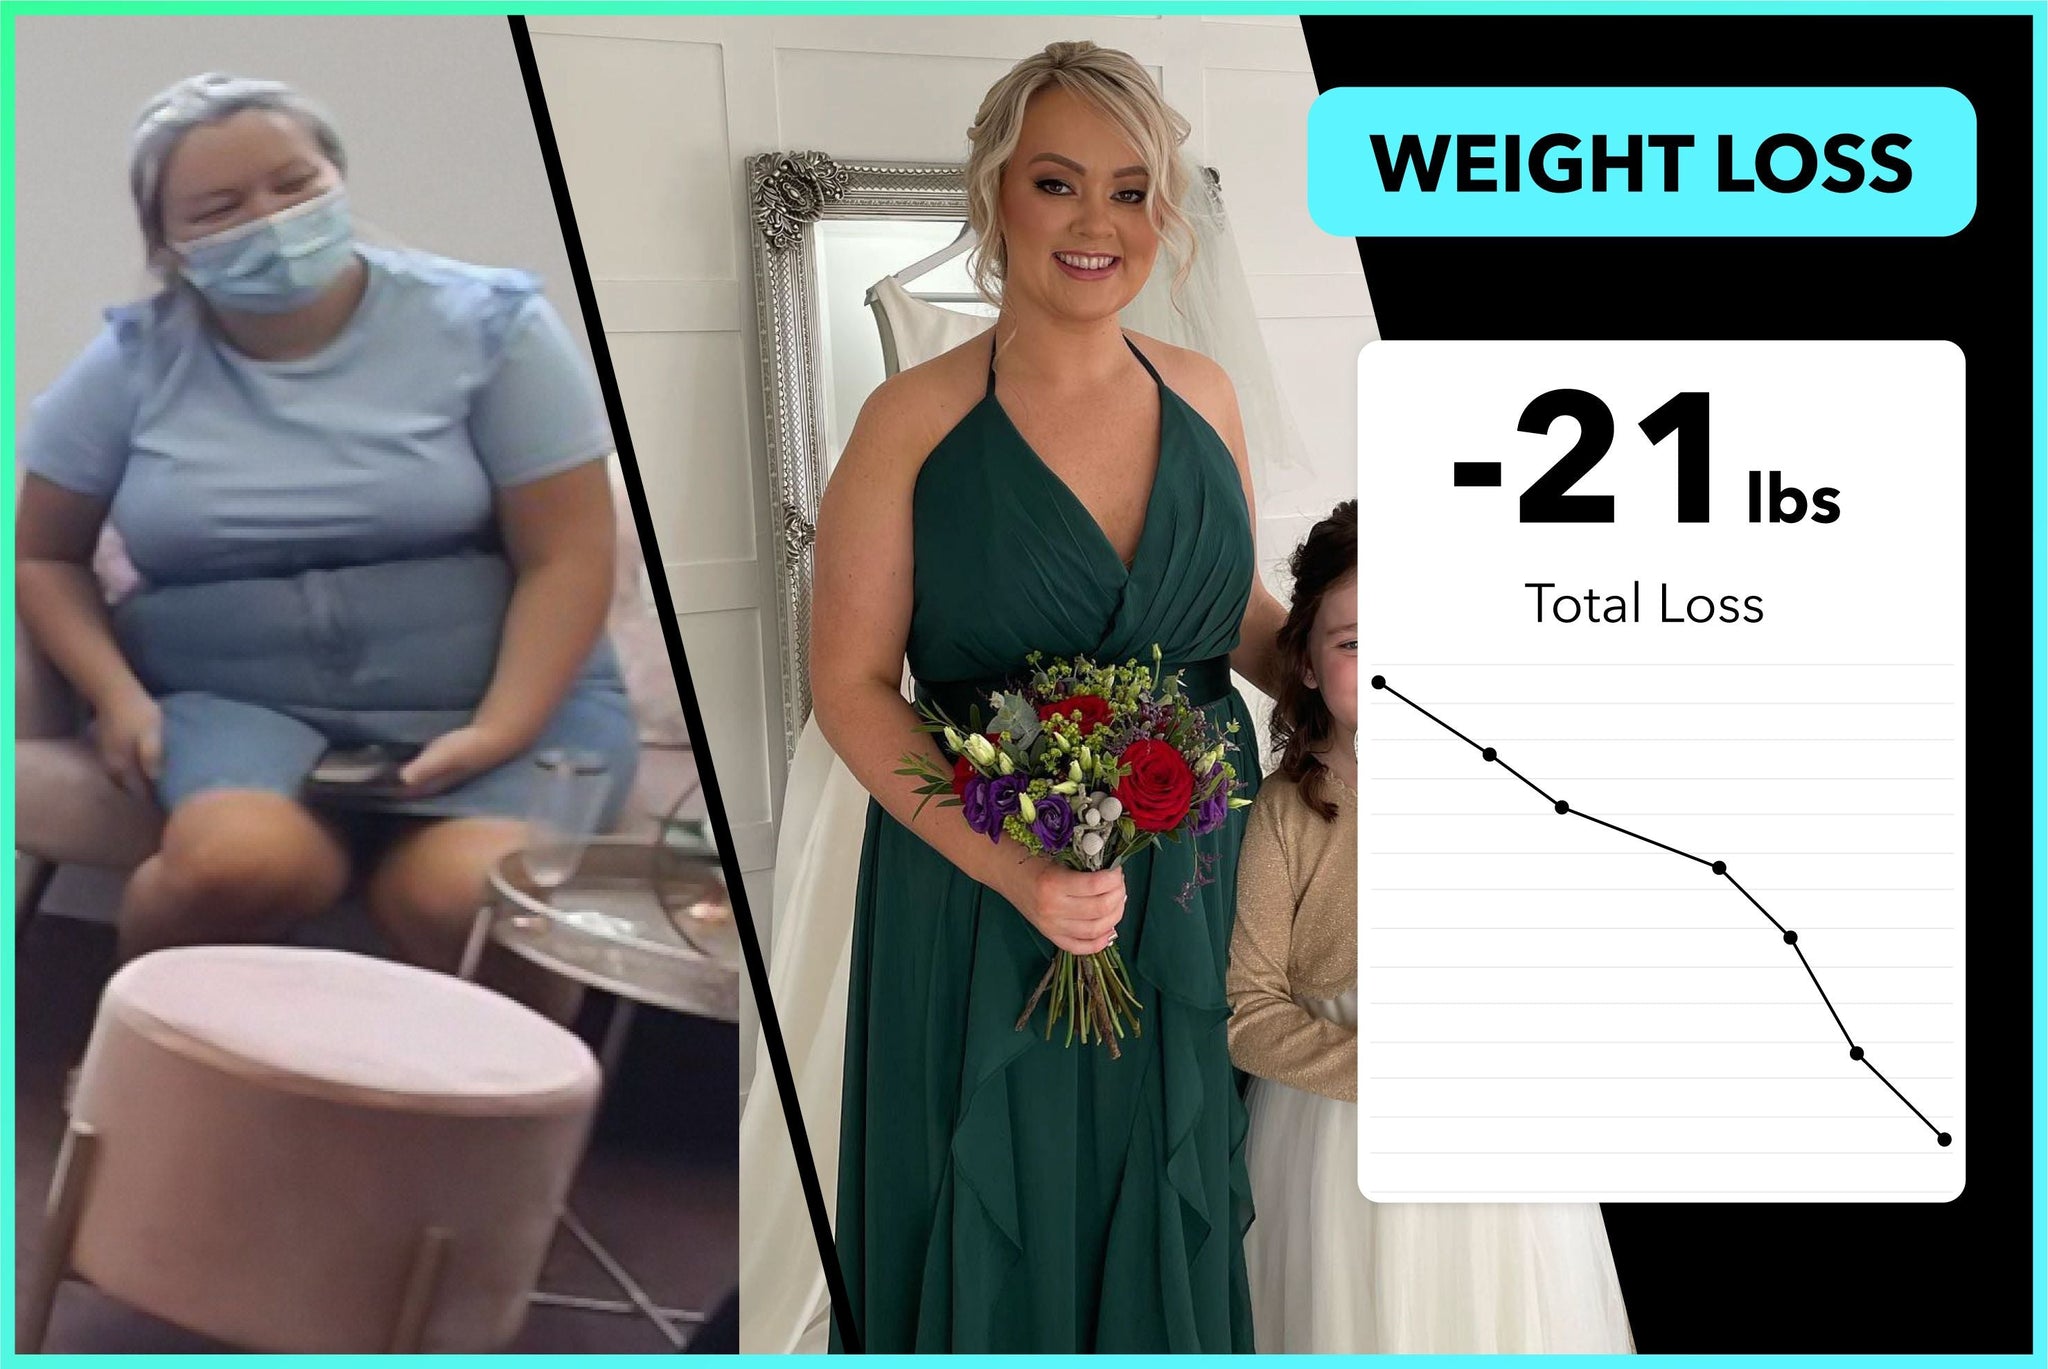 Danielle lost over 21lbs on the Life Plan